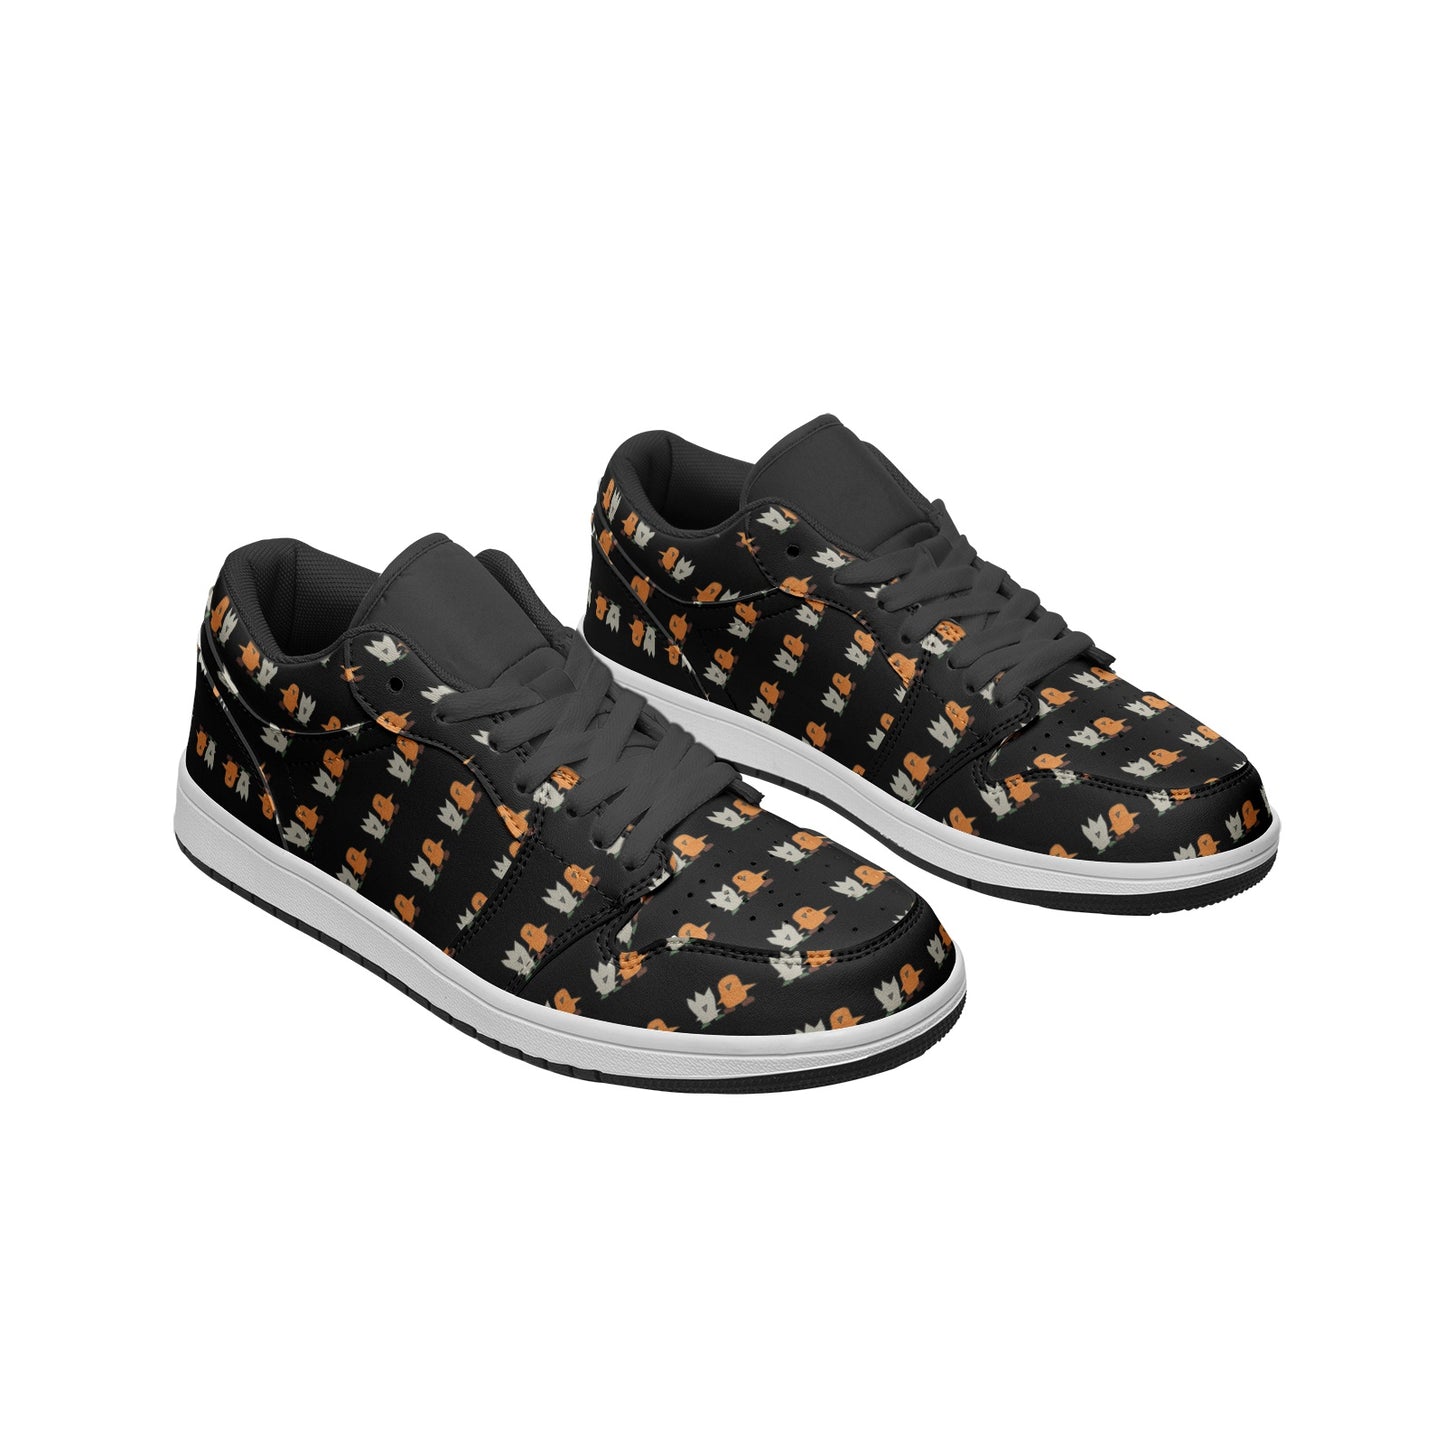 Fuzzy and Muffin by D.B. Unisex Low Top Leather Sneakers